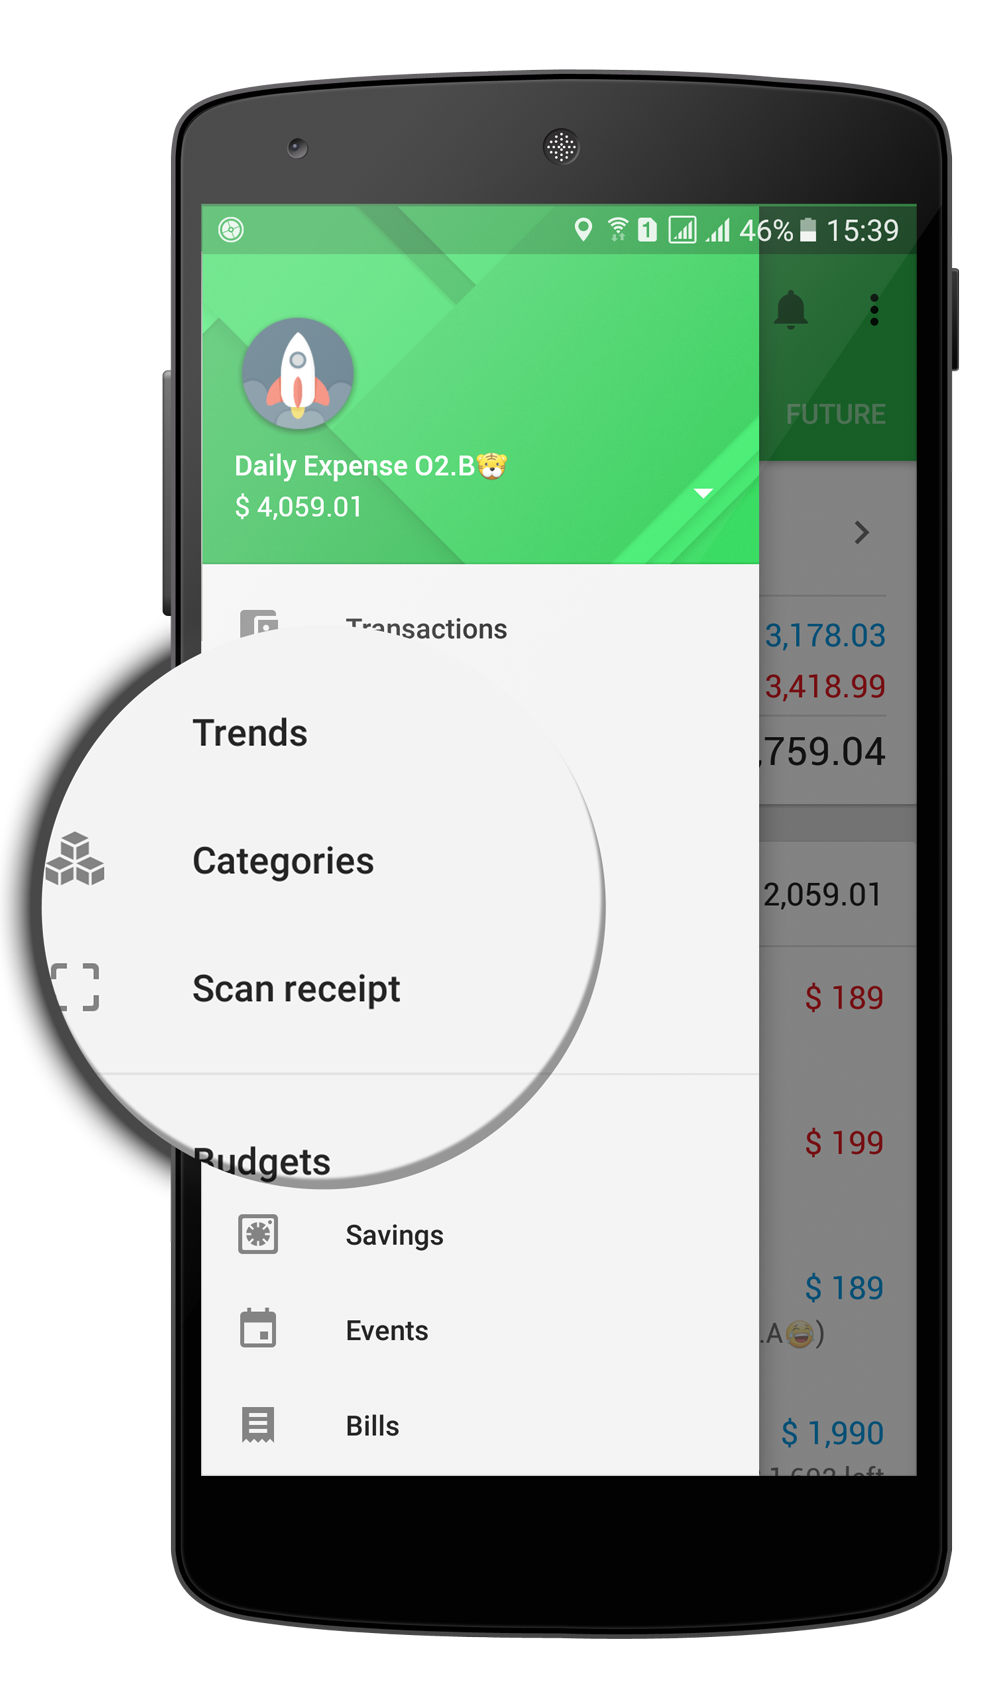 app to scan receipts for money